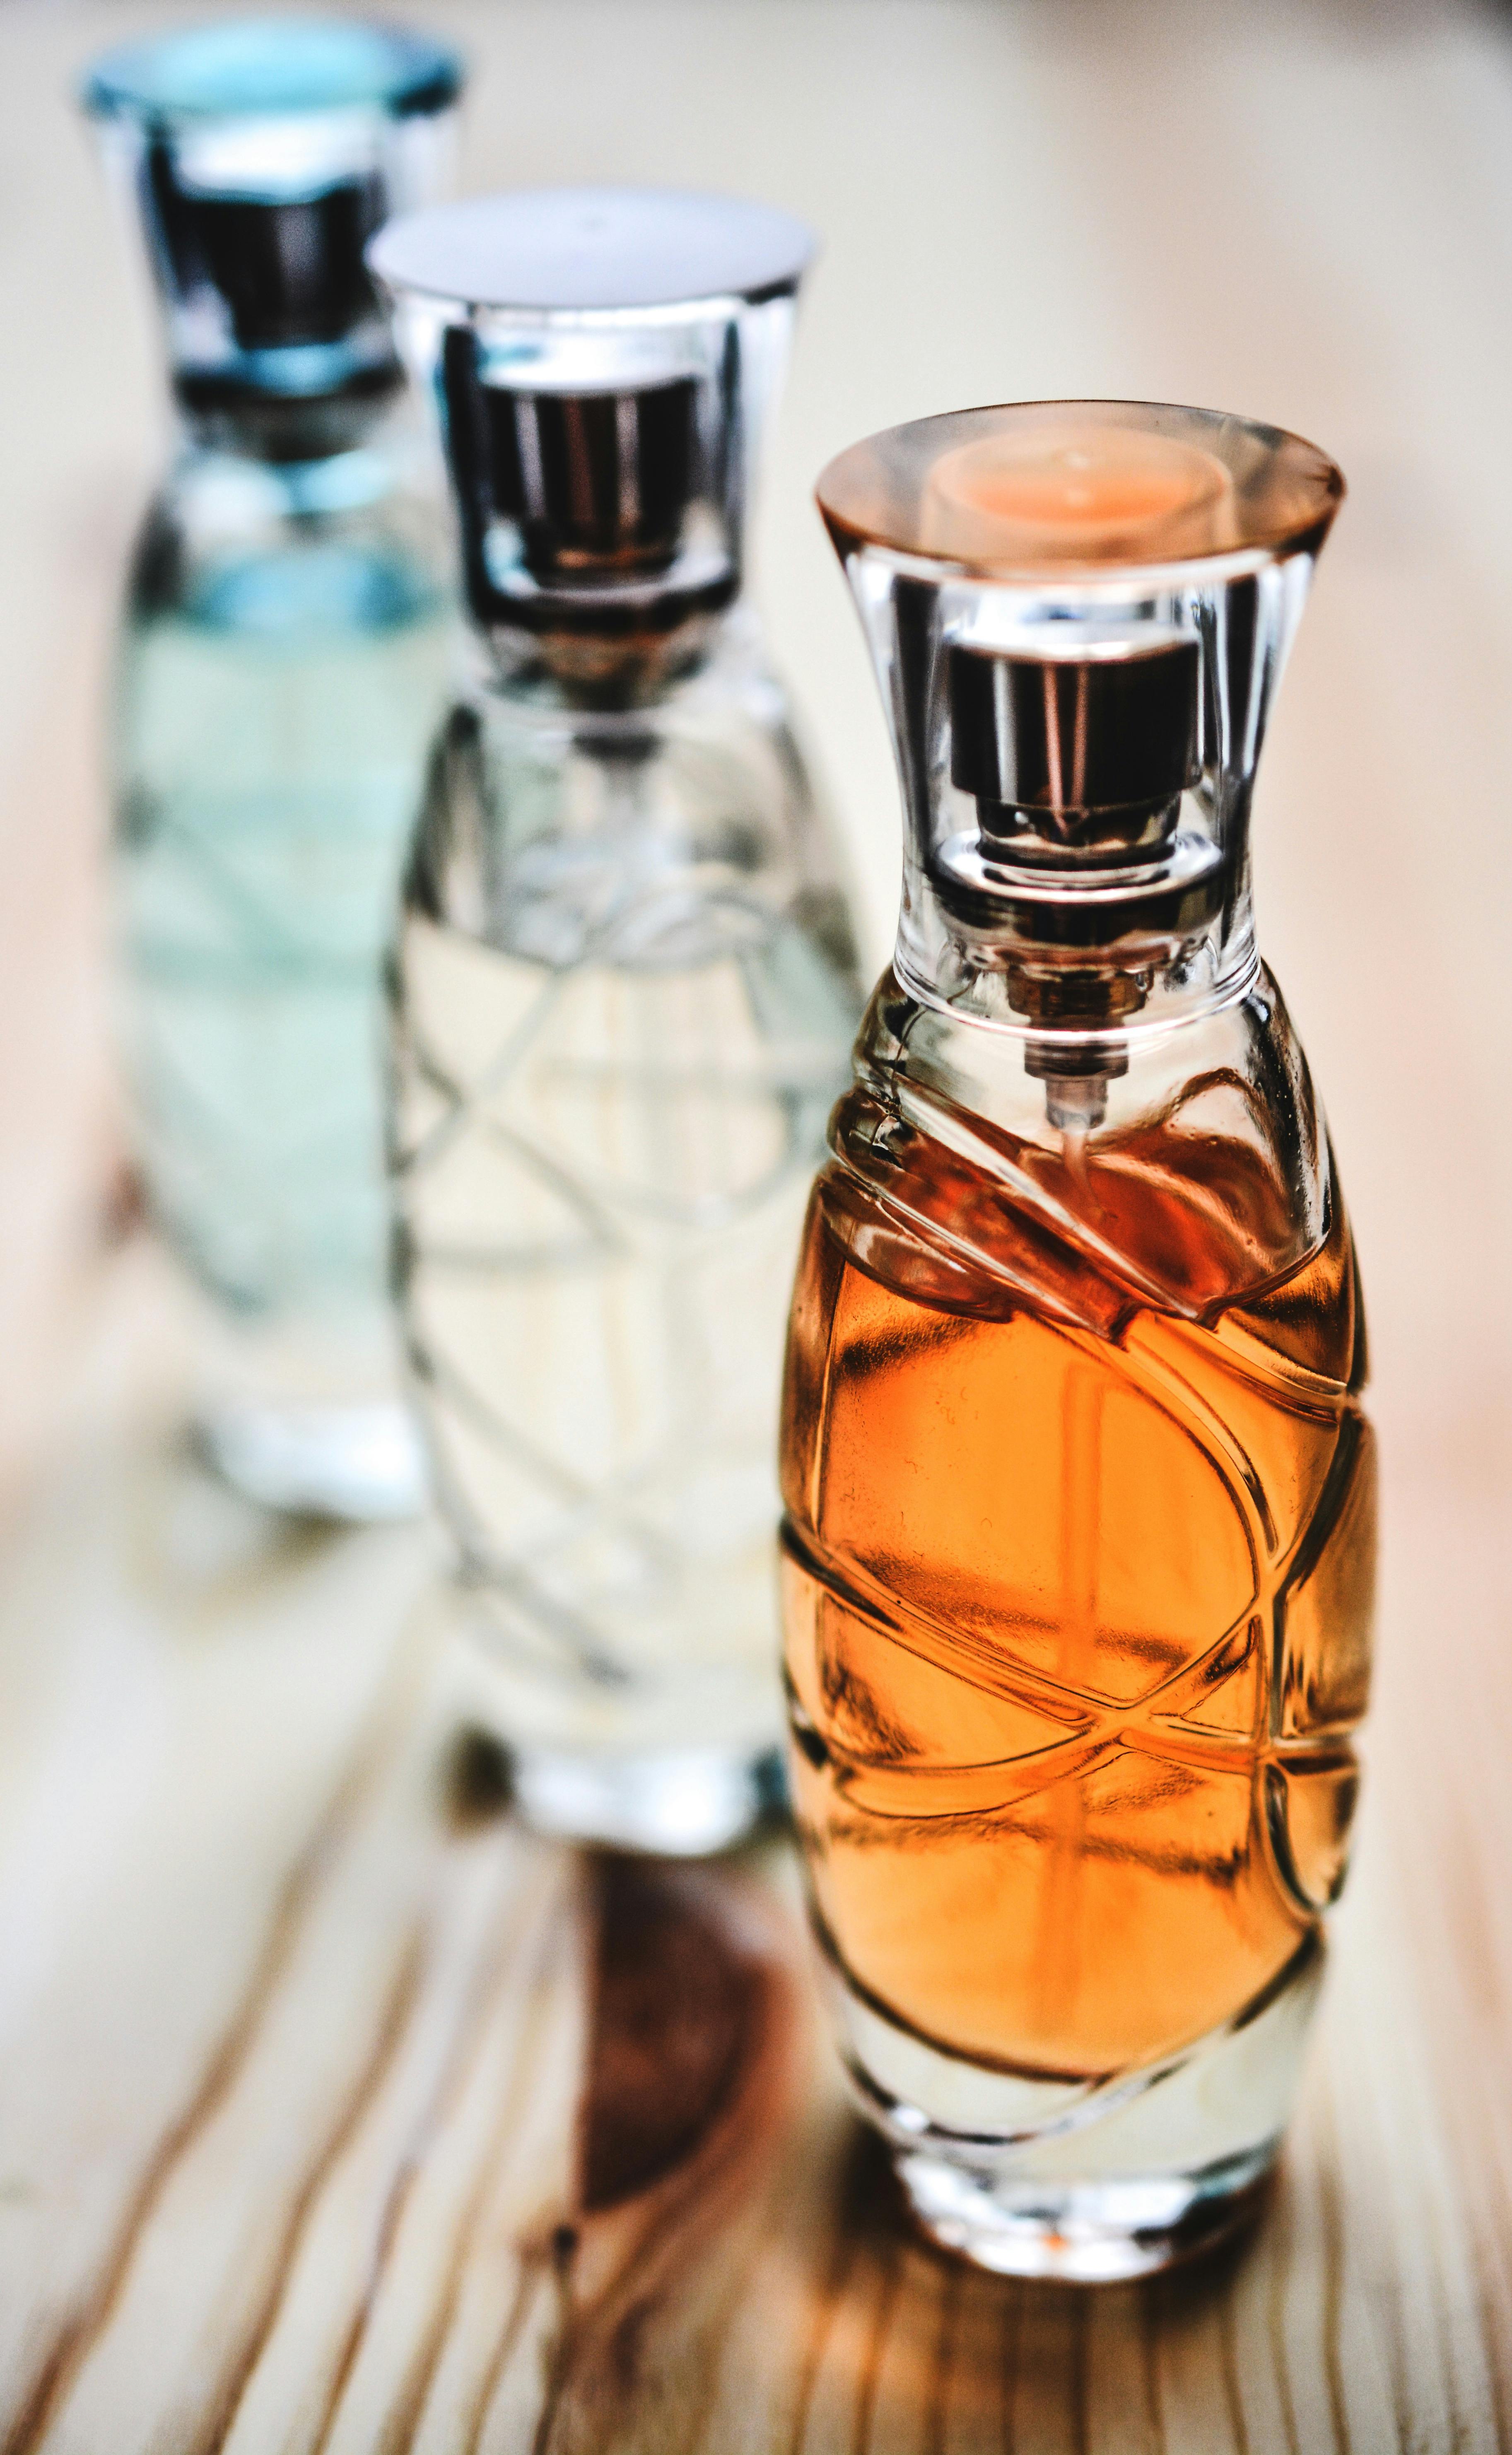 Terms You Need to Know When Using Perfume